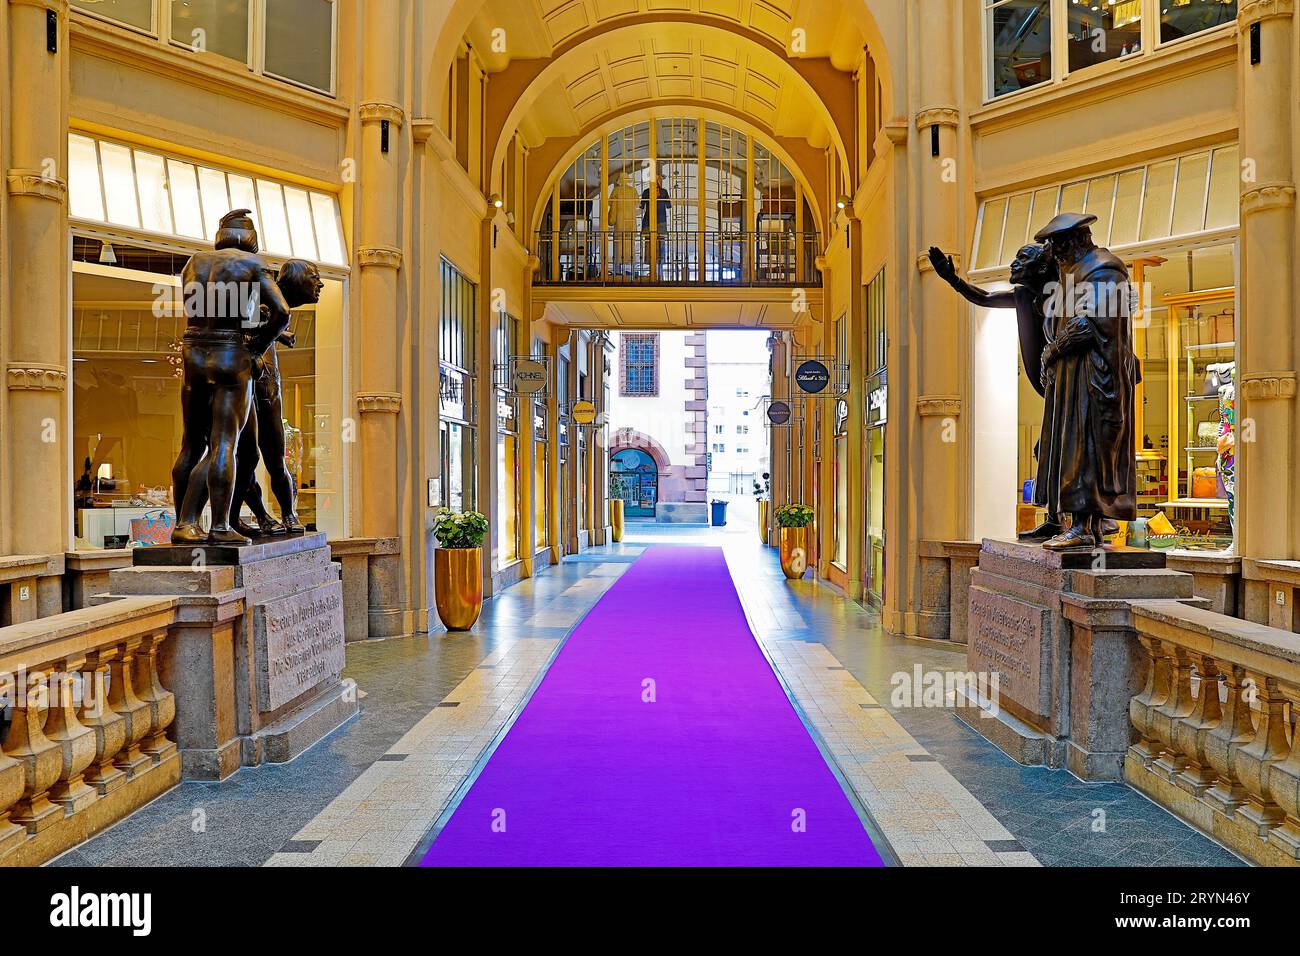 Interior view of MÃ¤dler Passage with entrances to Auerbachs Keller, Leipzig, Saxony, Germany, Europe Stock Photo